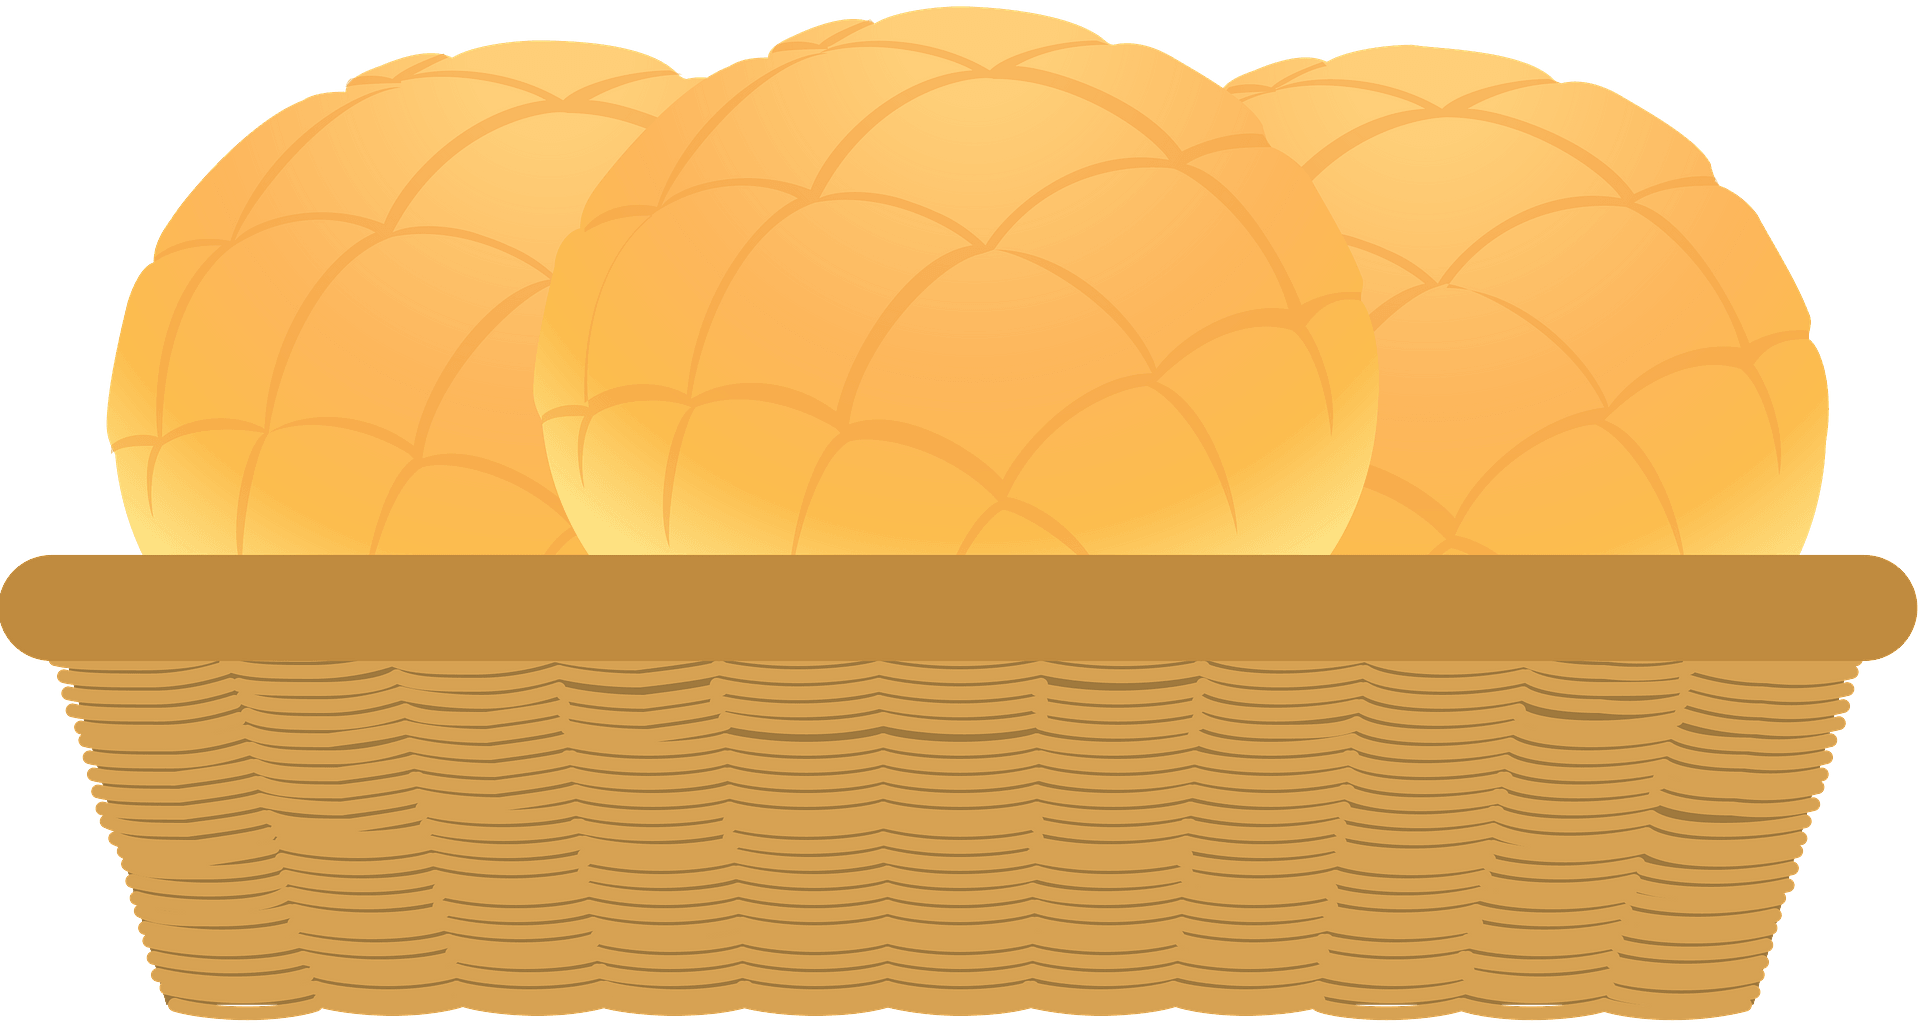 Basket Vector French Bread Download Free Image PNG Image